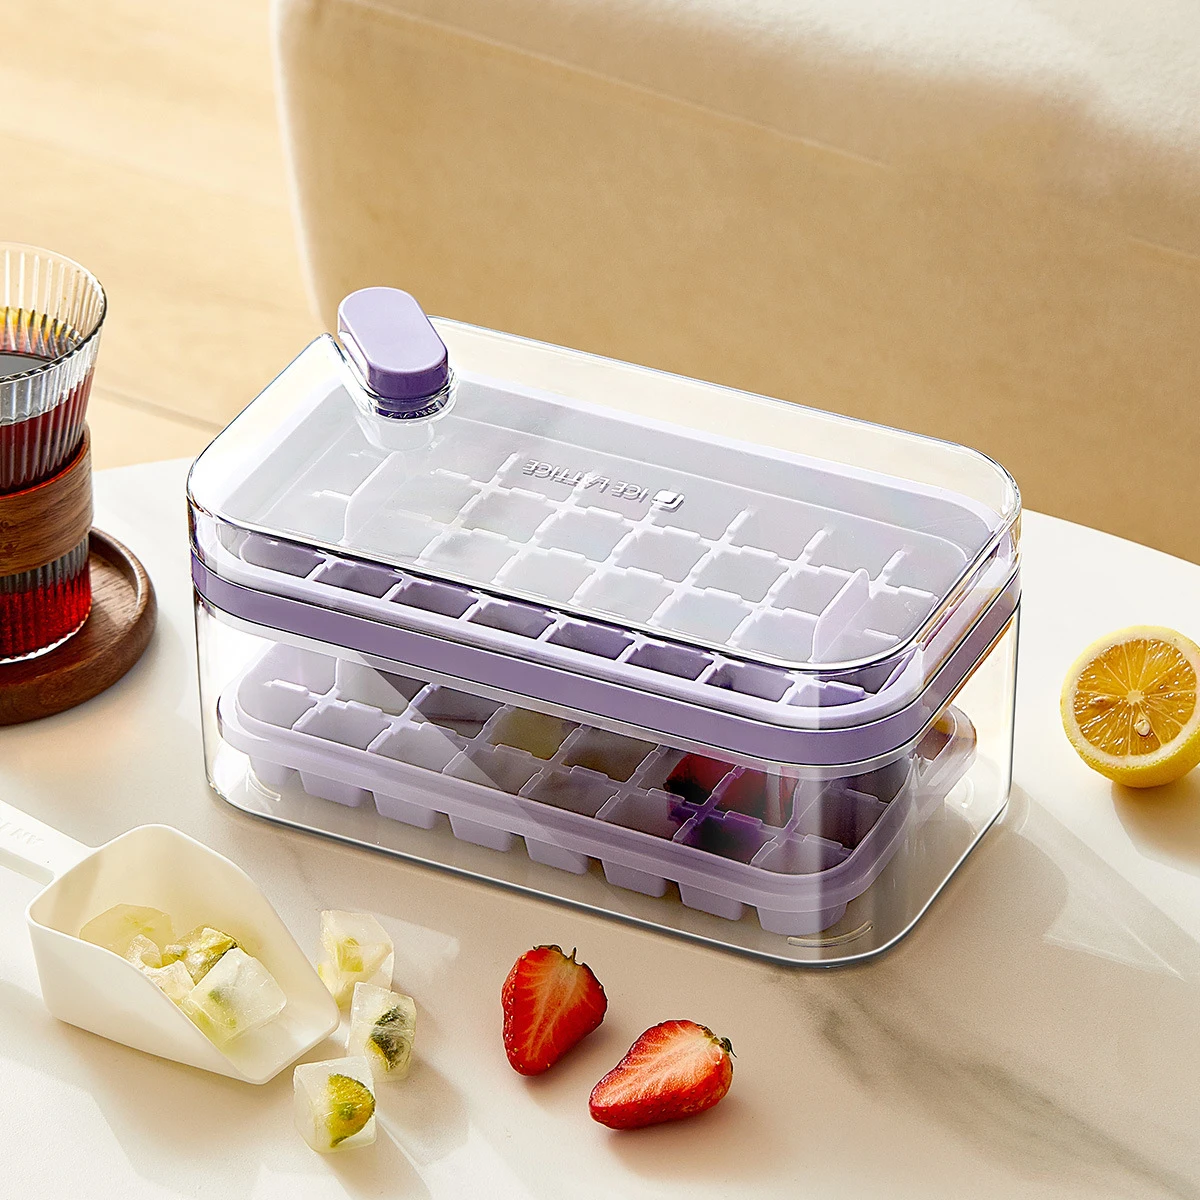 https://ae01.alicdn.com/kf/S9f86f58d4ac04dd99eb61b74dbb3cb58Q/One-button-Press-Type-Ice-Mold-Box-Grid-Ice-Cube-Maker-Ice-Tray-Mold-With-Storage.jpg